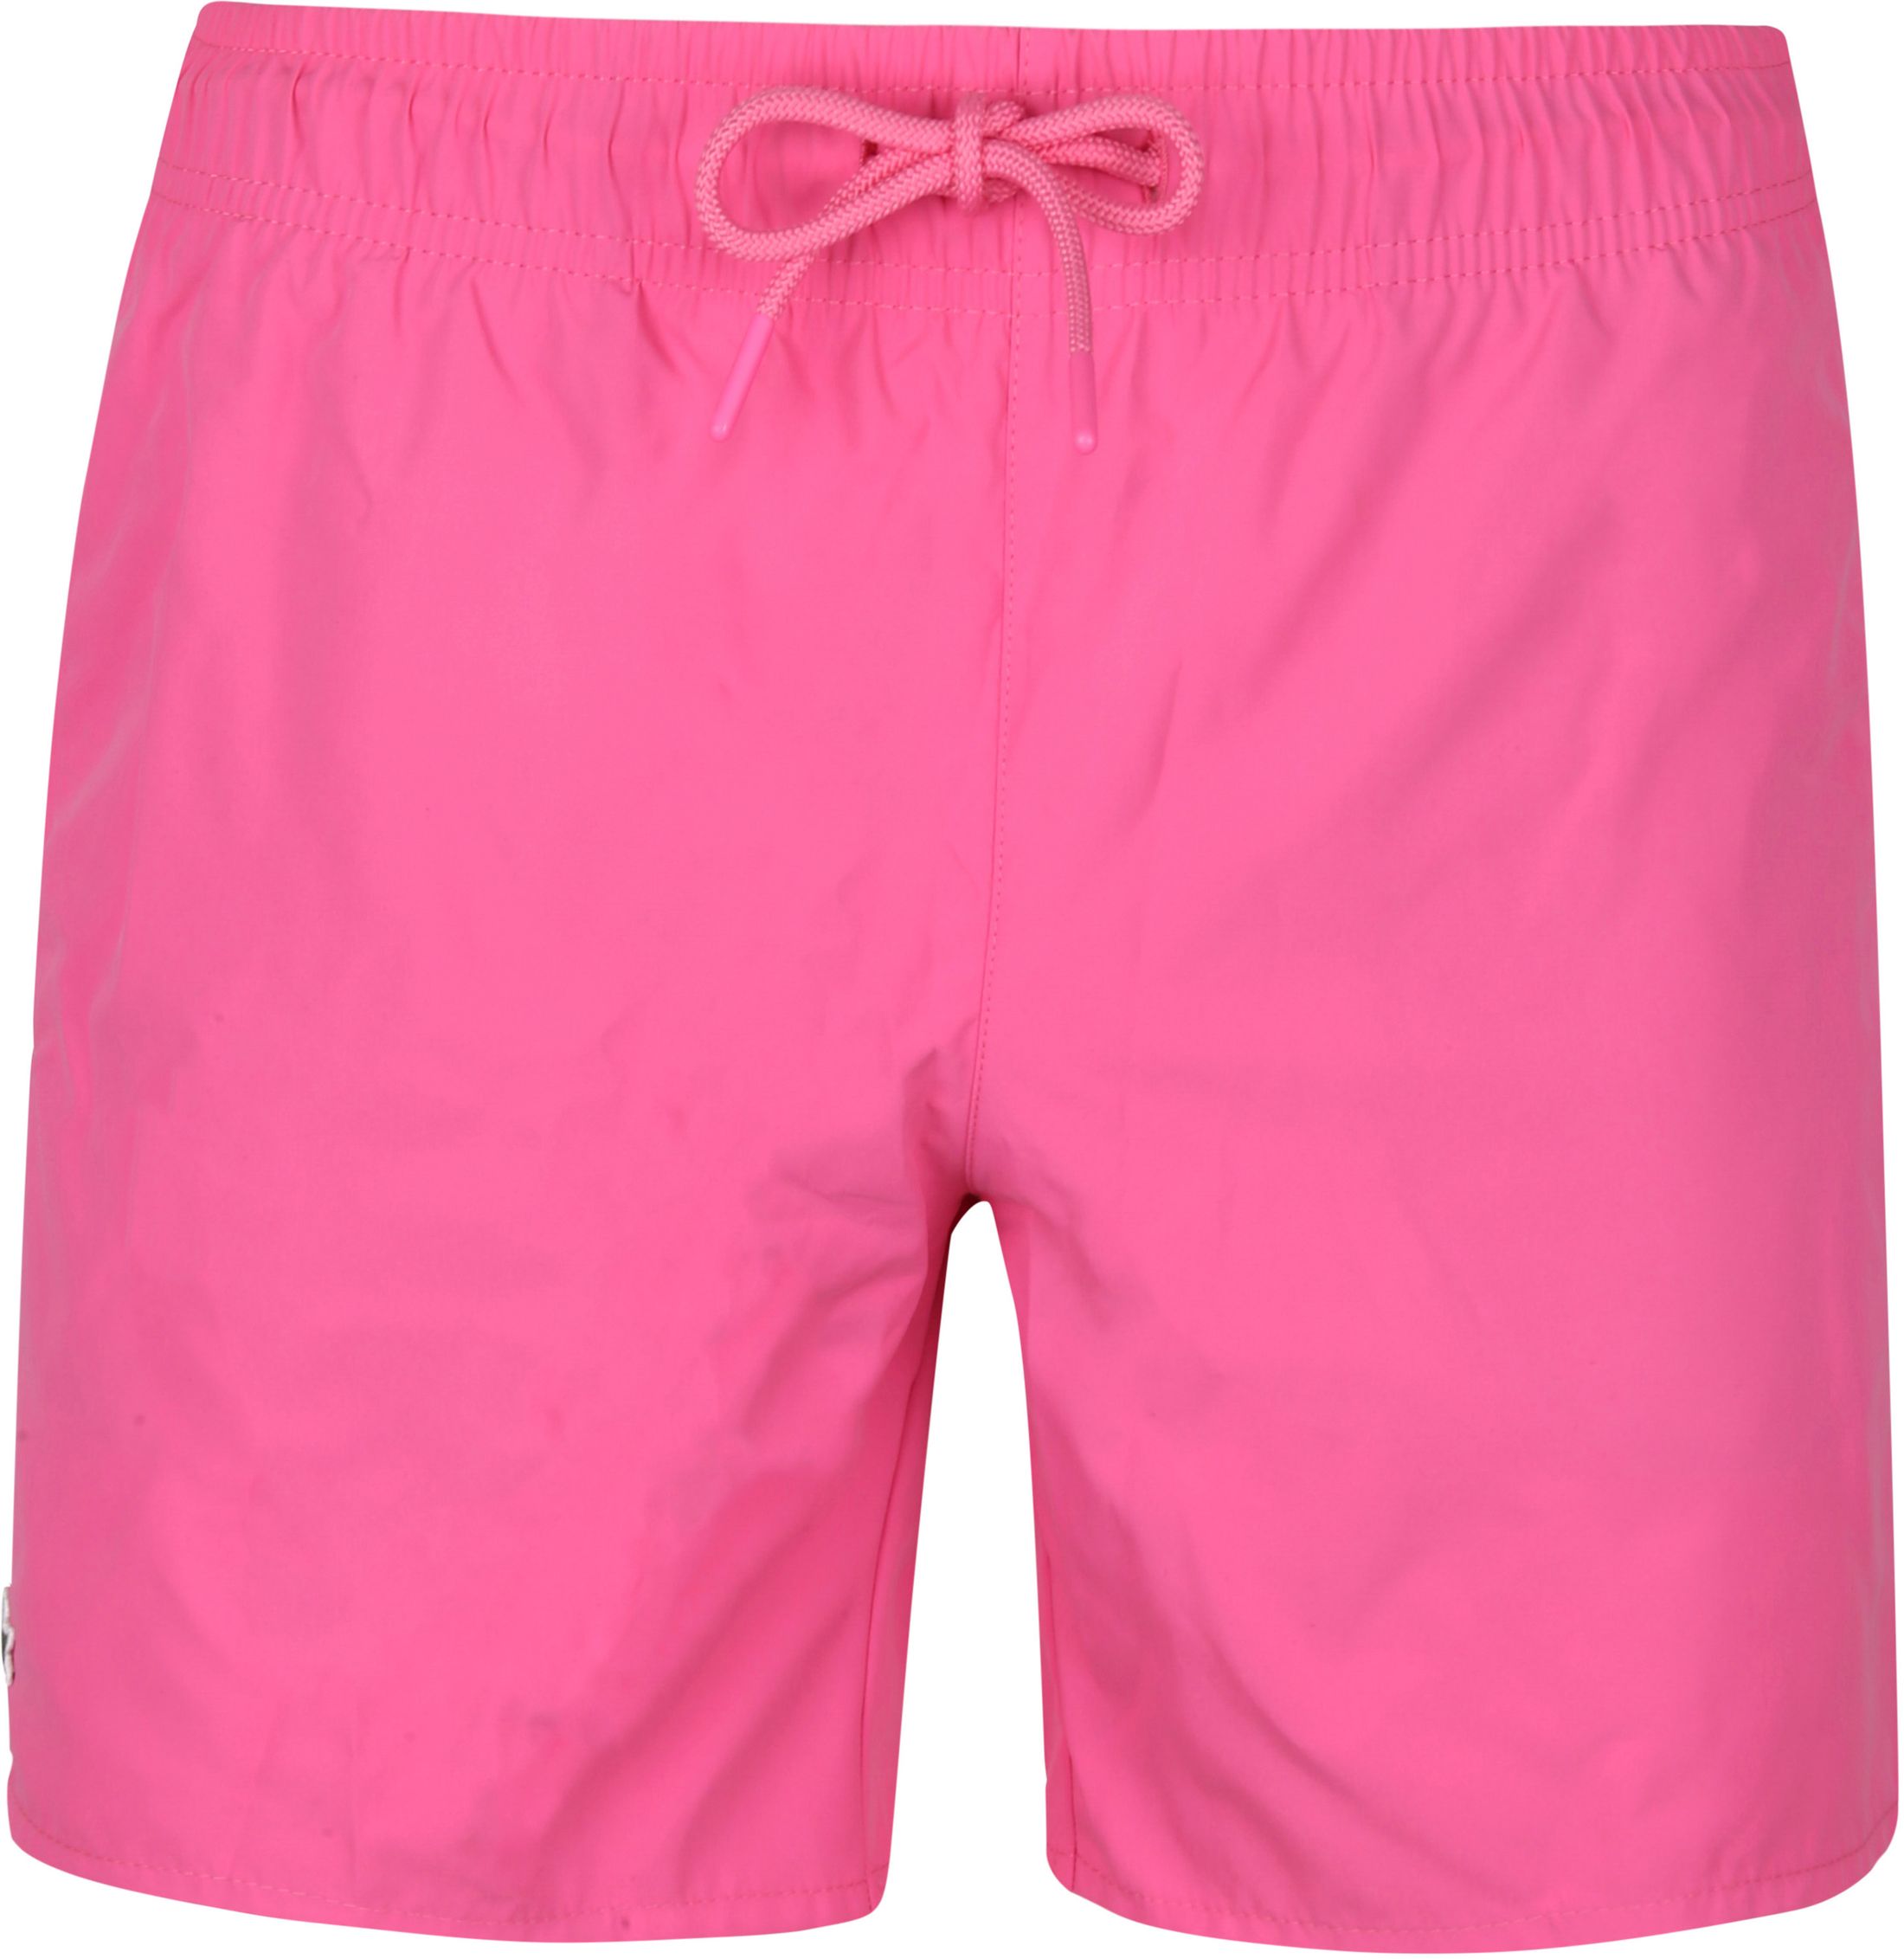 Lacoste Swimshorts Pink size L